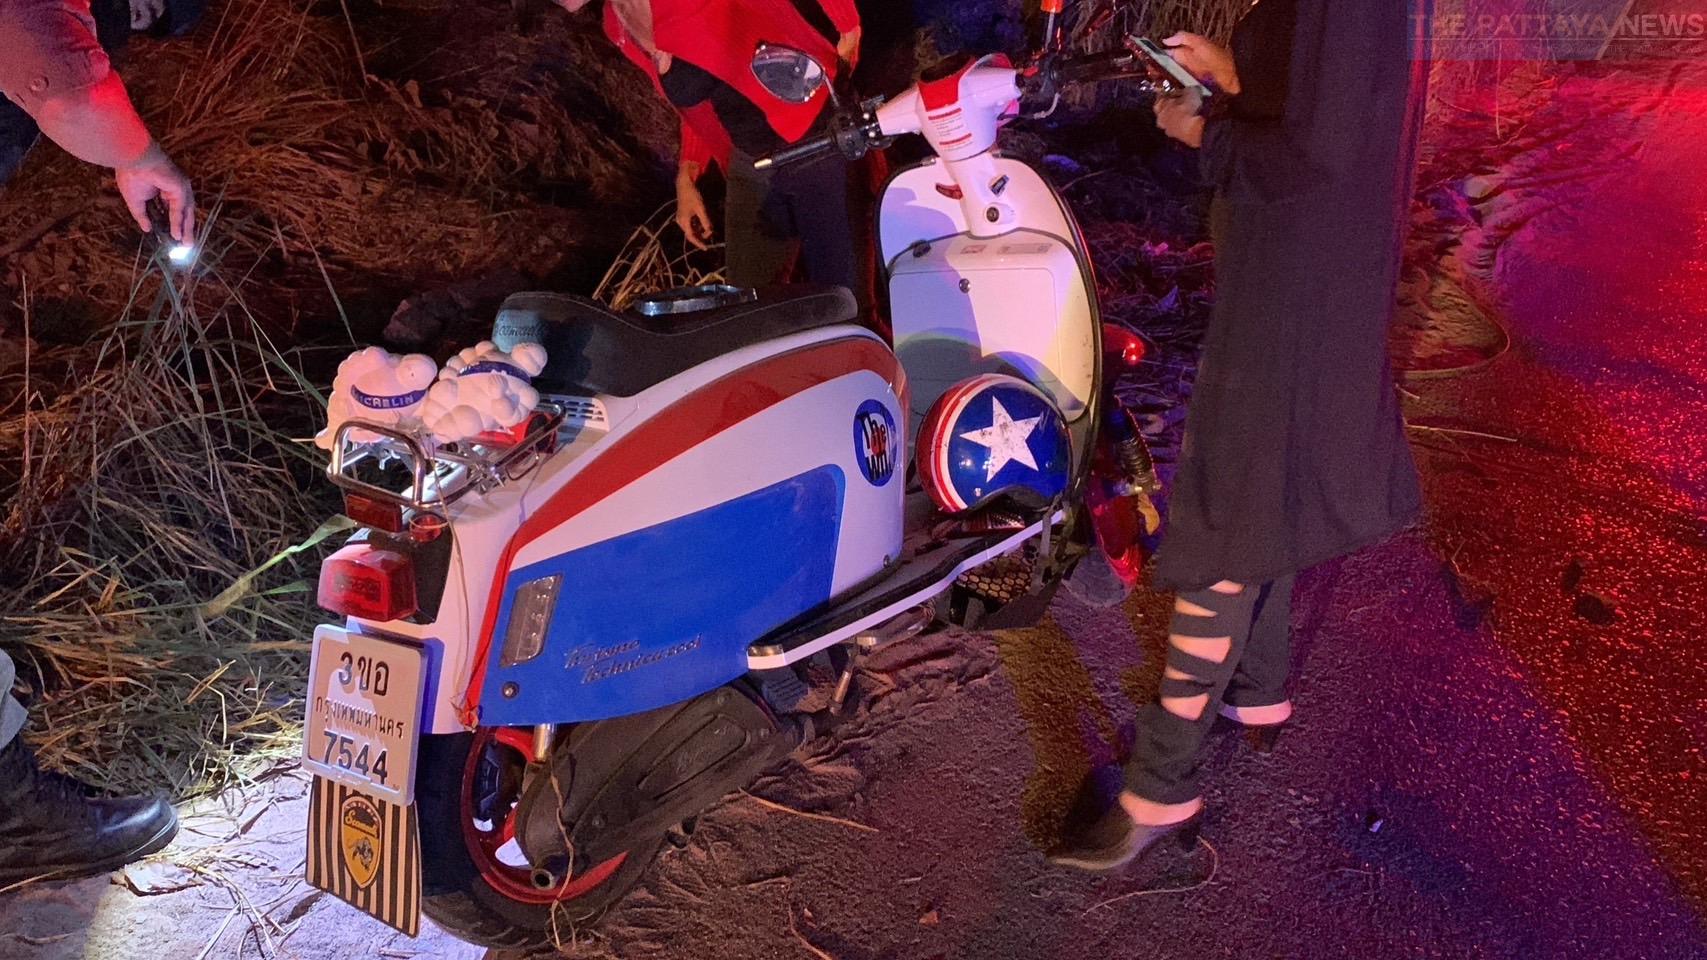 australian-man-dies-after-suspected-road-rage-incident-with-group-of-motorbike-racers-in-the-pattaya-area-–-the-pattaya-news